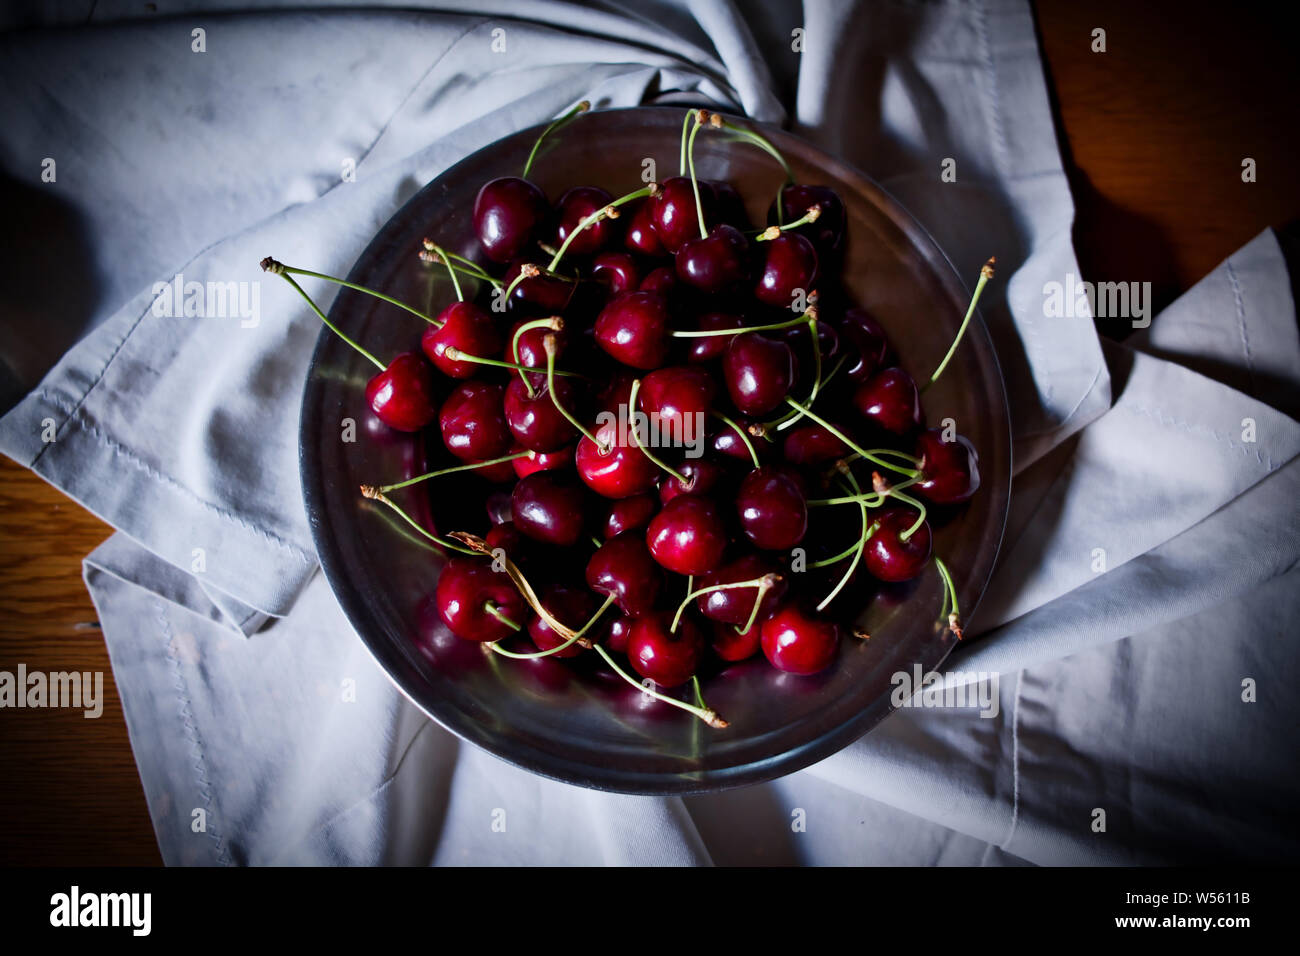 Cherry, red ripe cherries in plate and on fabric, low key or dark photography Stock Photo